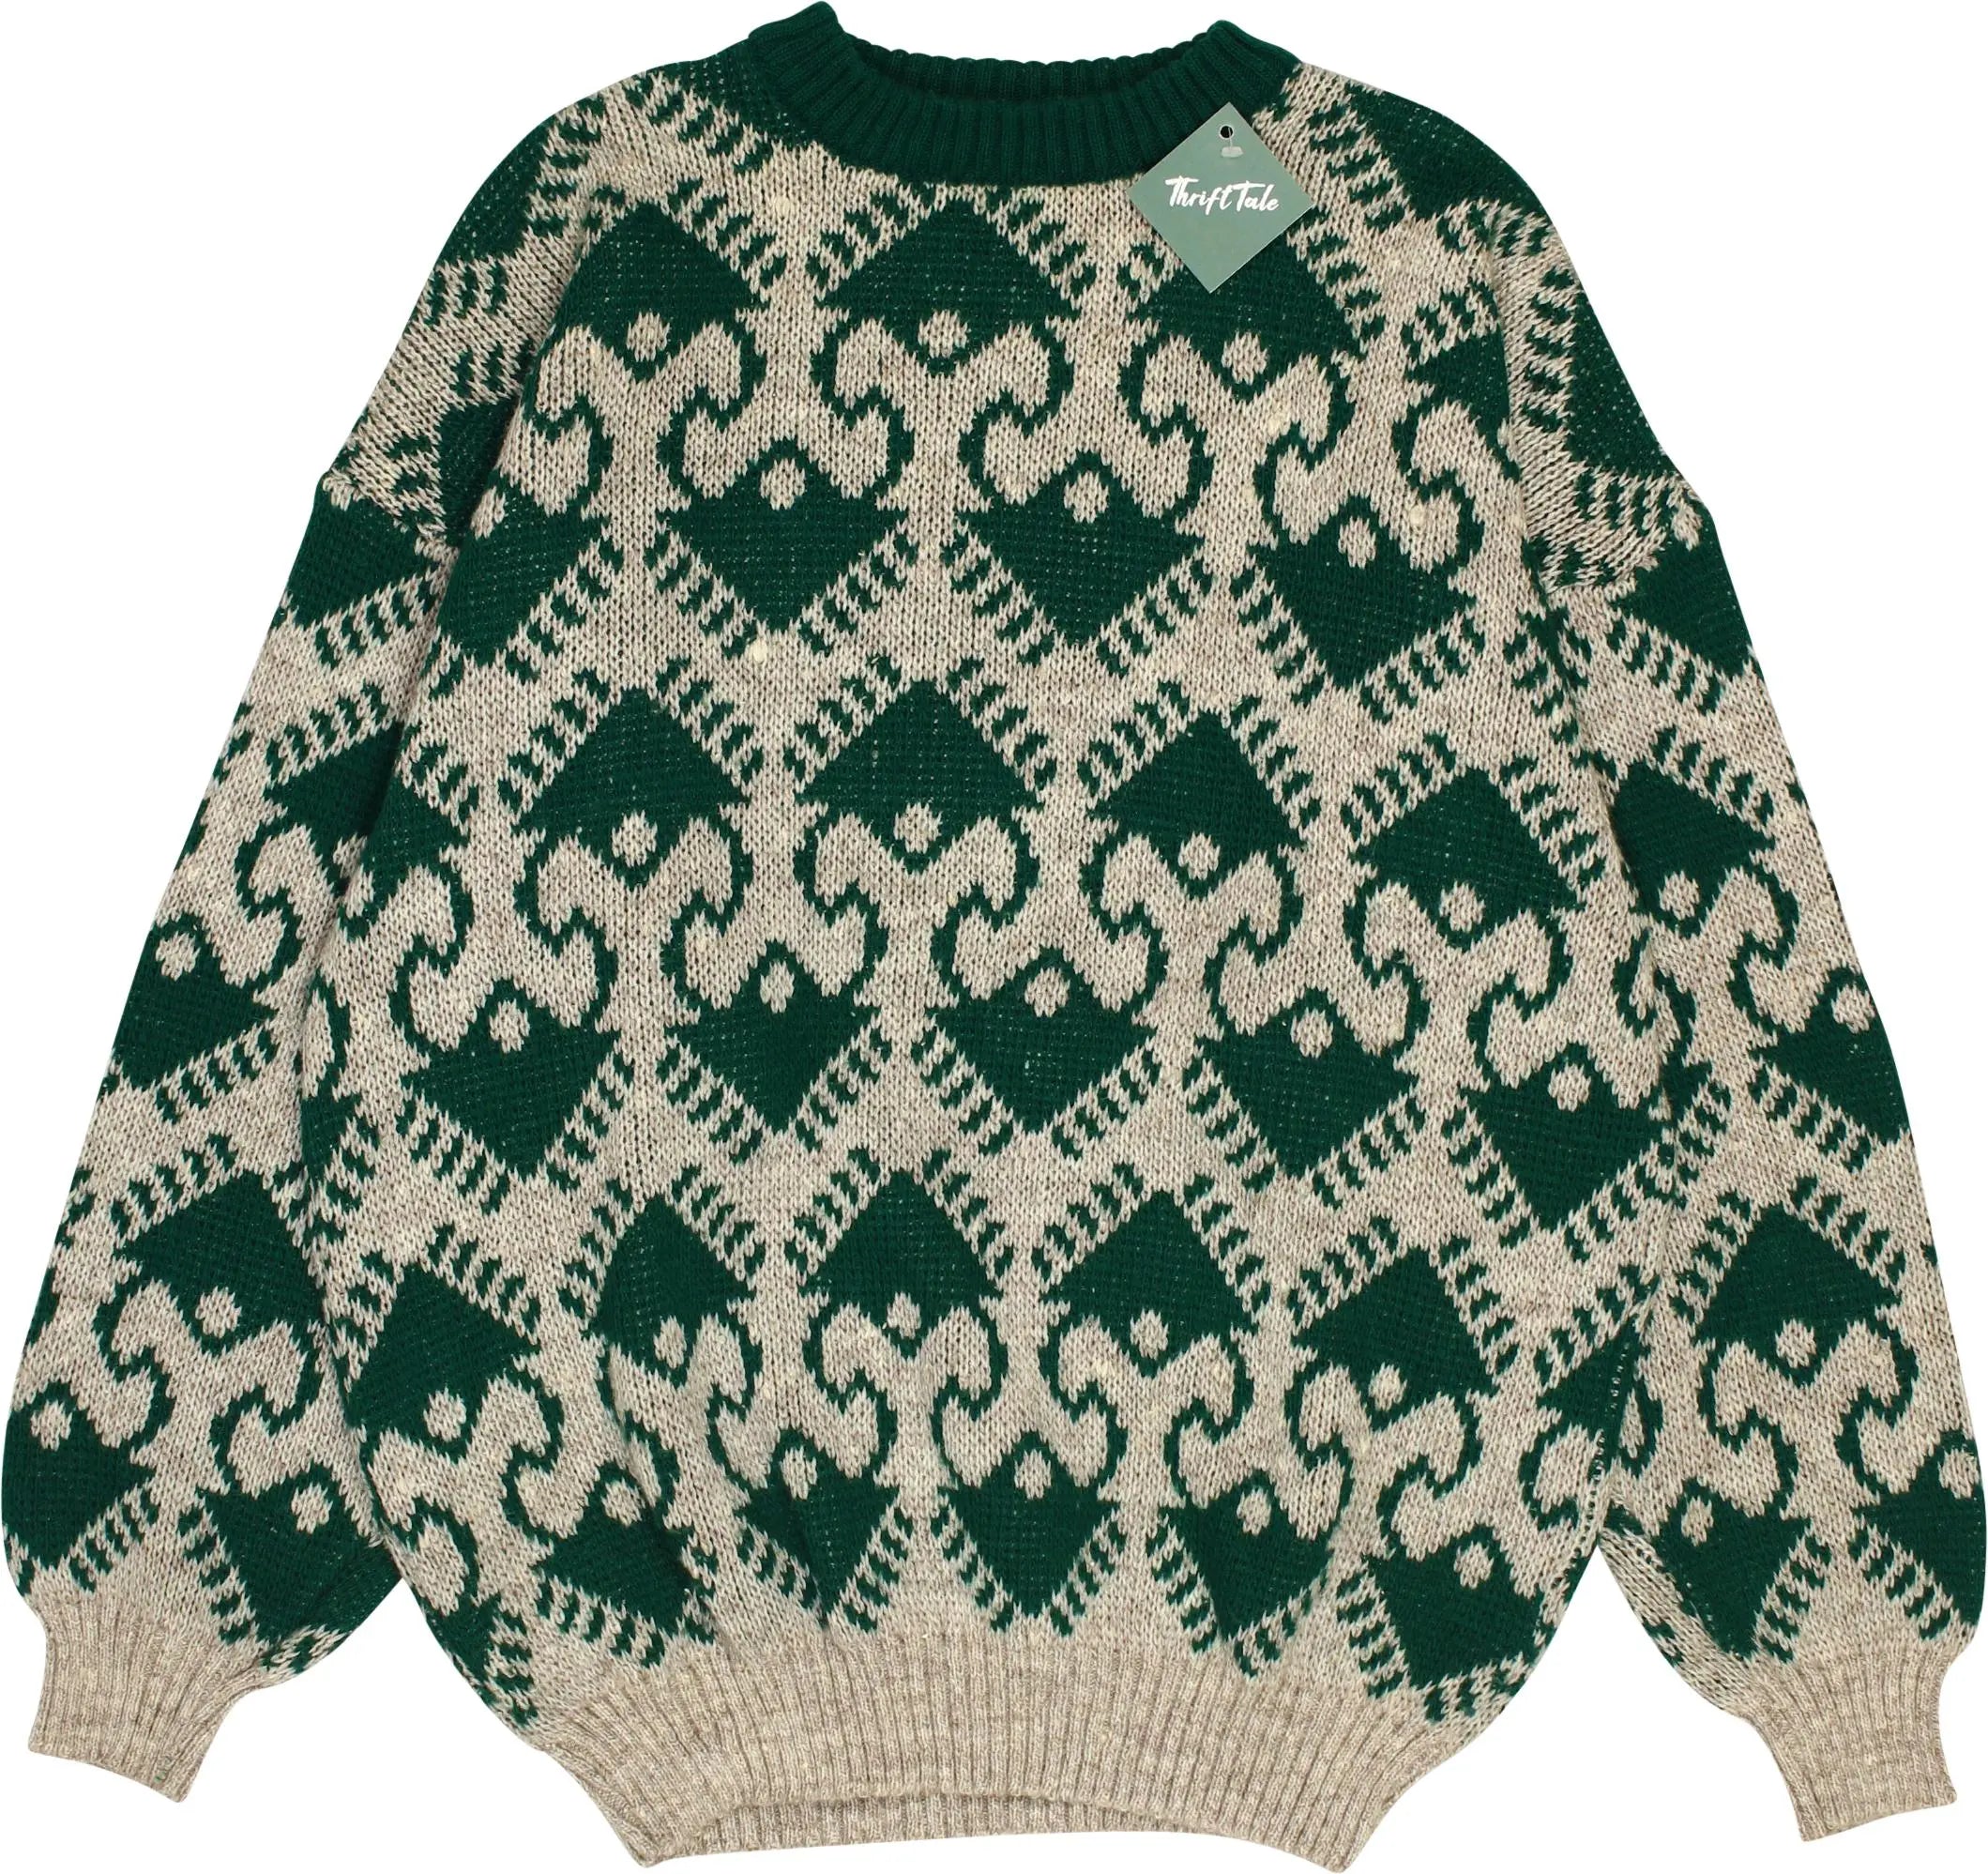 Unknown - Green Patterned Jumper- ThriftTale.com - Vintage and second handclothing